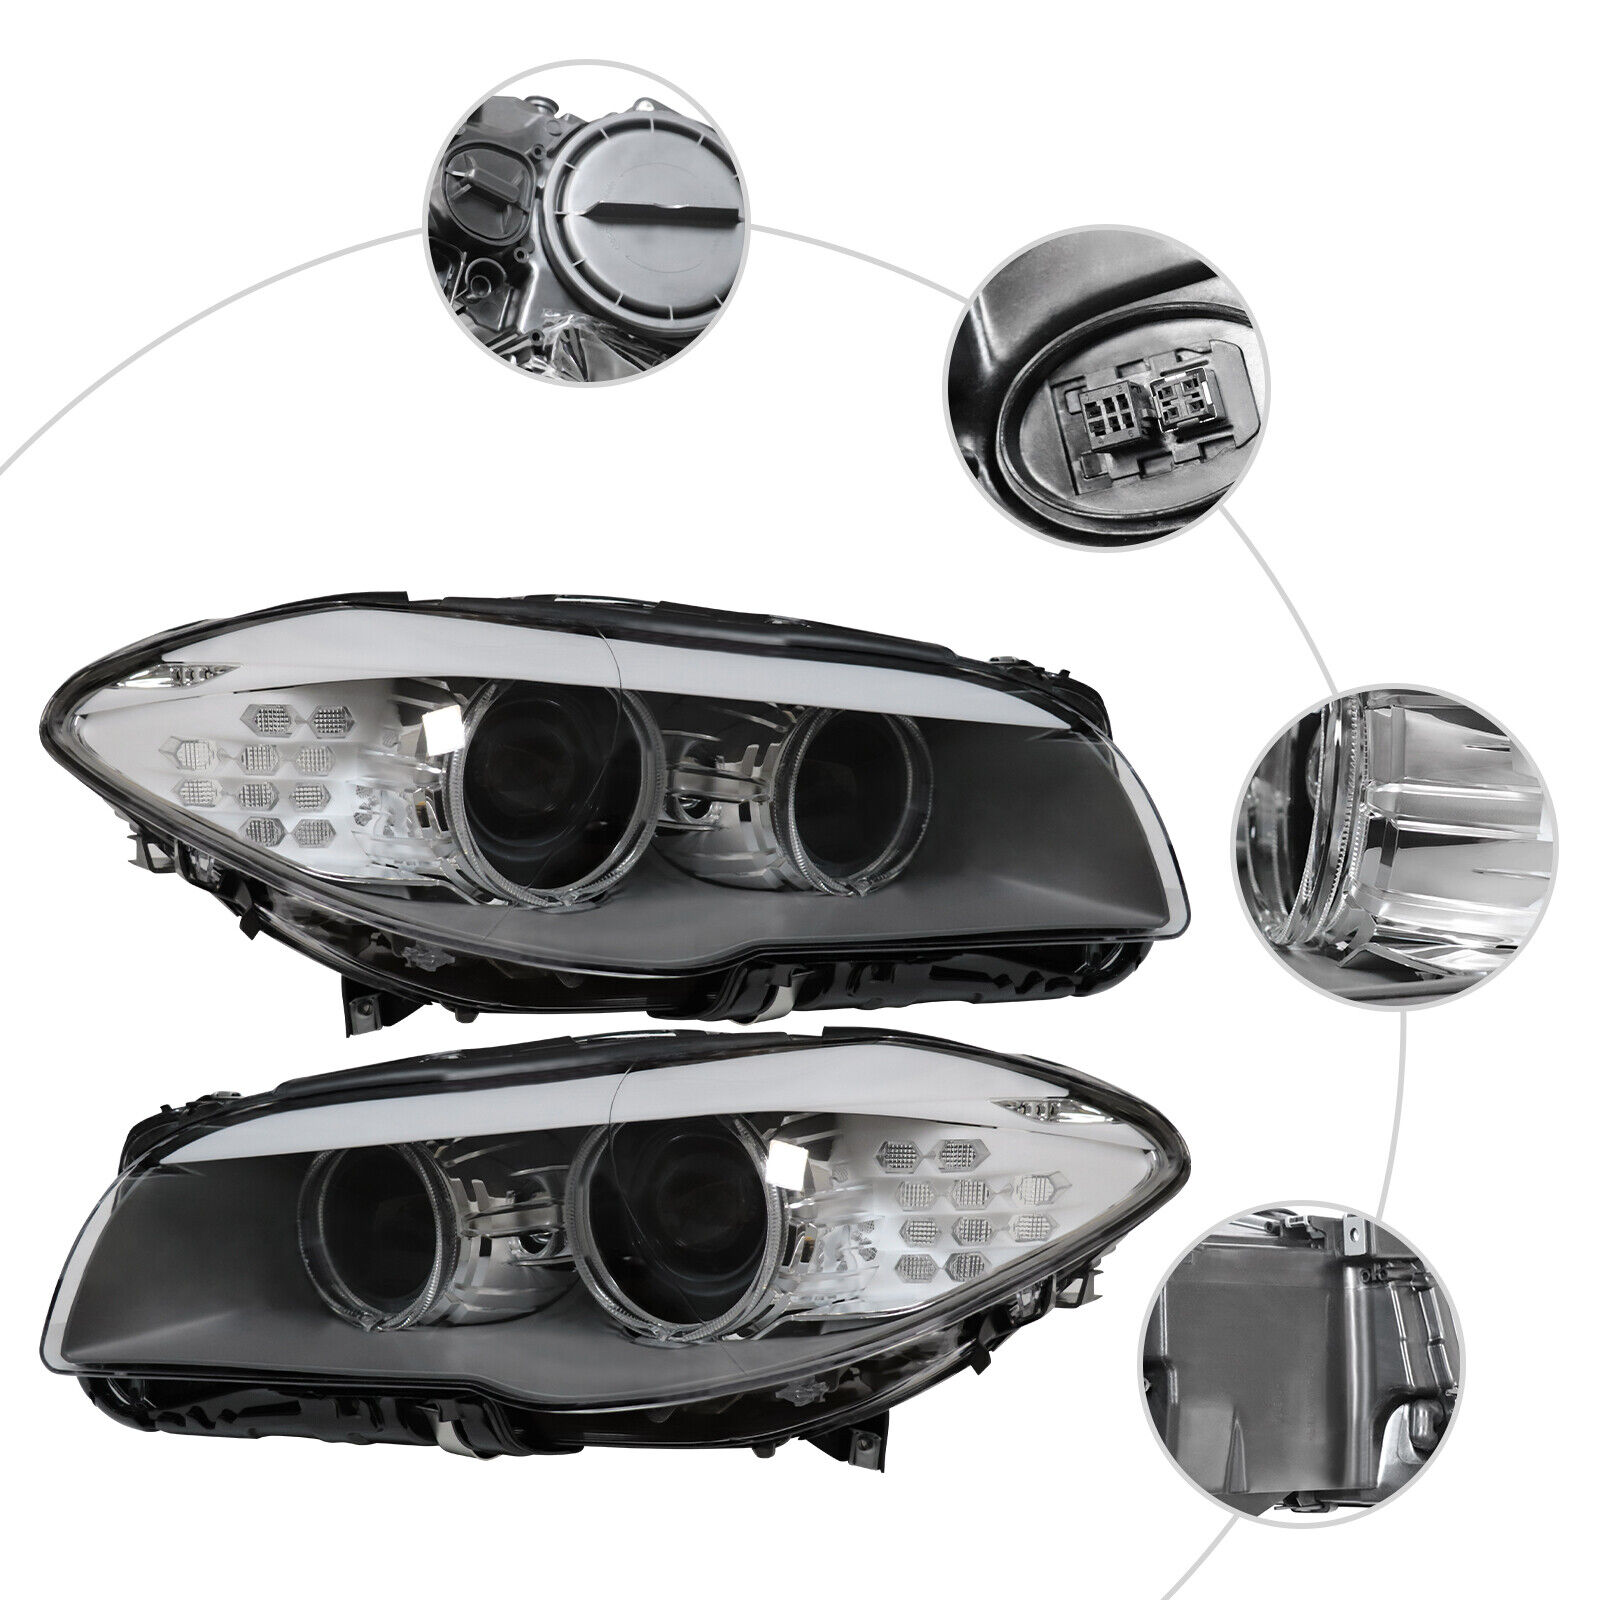 For BMW 5 Series F10 528i 2011-2013 Xenon Headlight HID Headlamp Left+Right Side